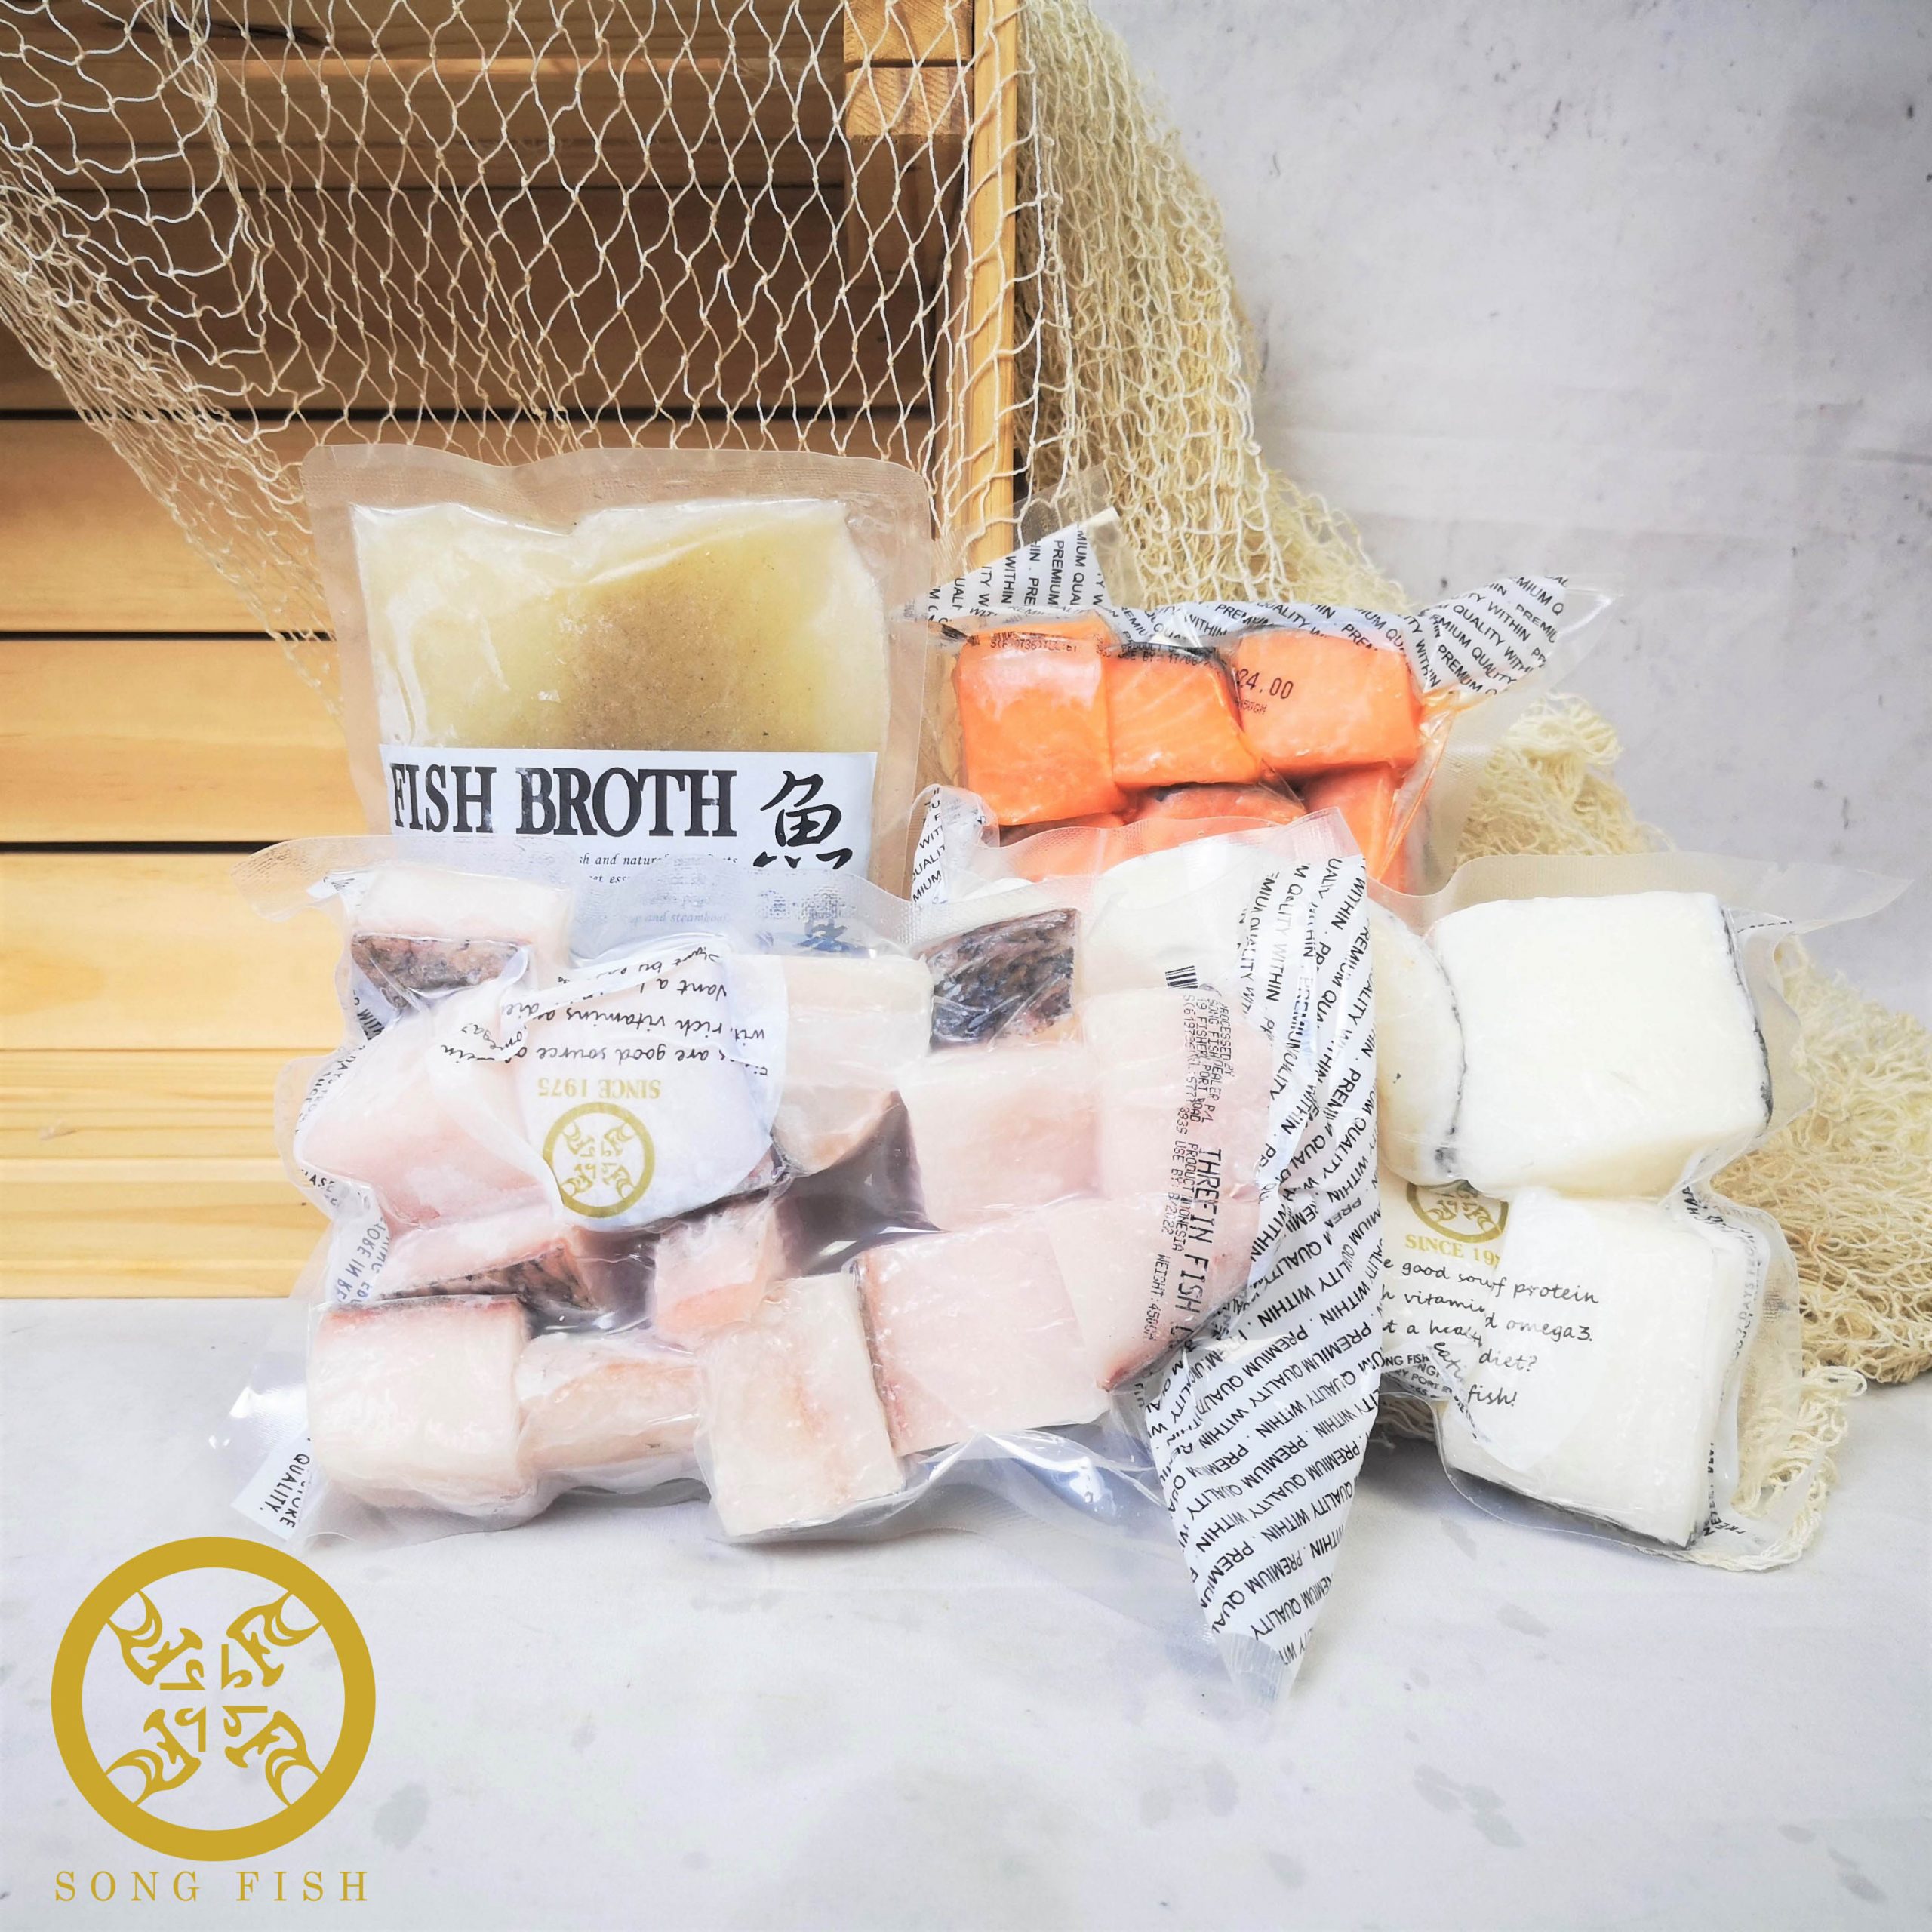 Precious Baby Bundle – The Seafood Market Place by Song Fish